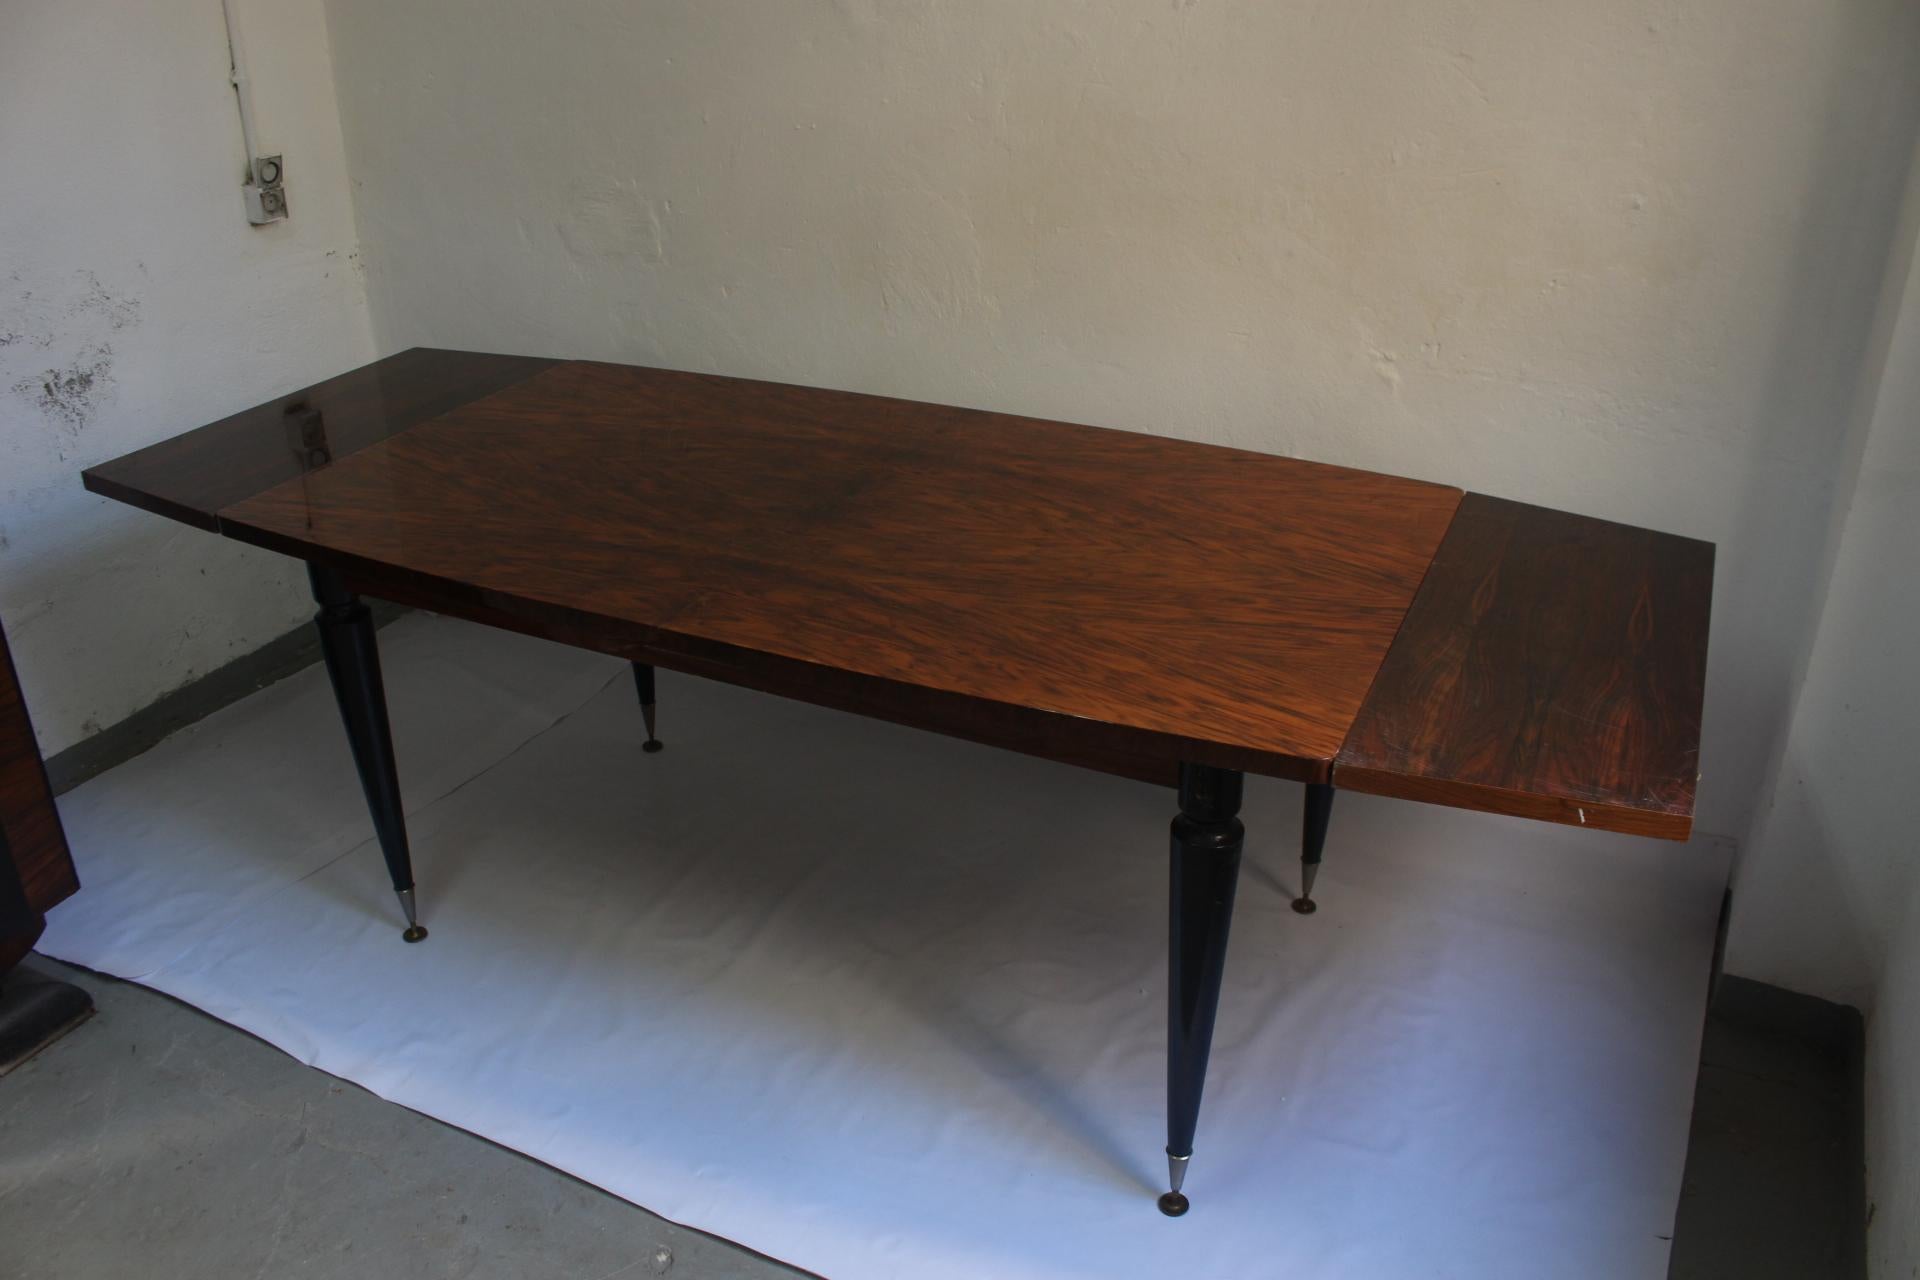 French Art Deco High Quality American Walnut Burl Extensible Dining Table, 1940s For Sale 7